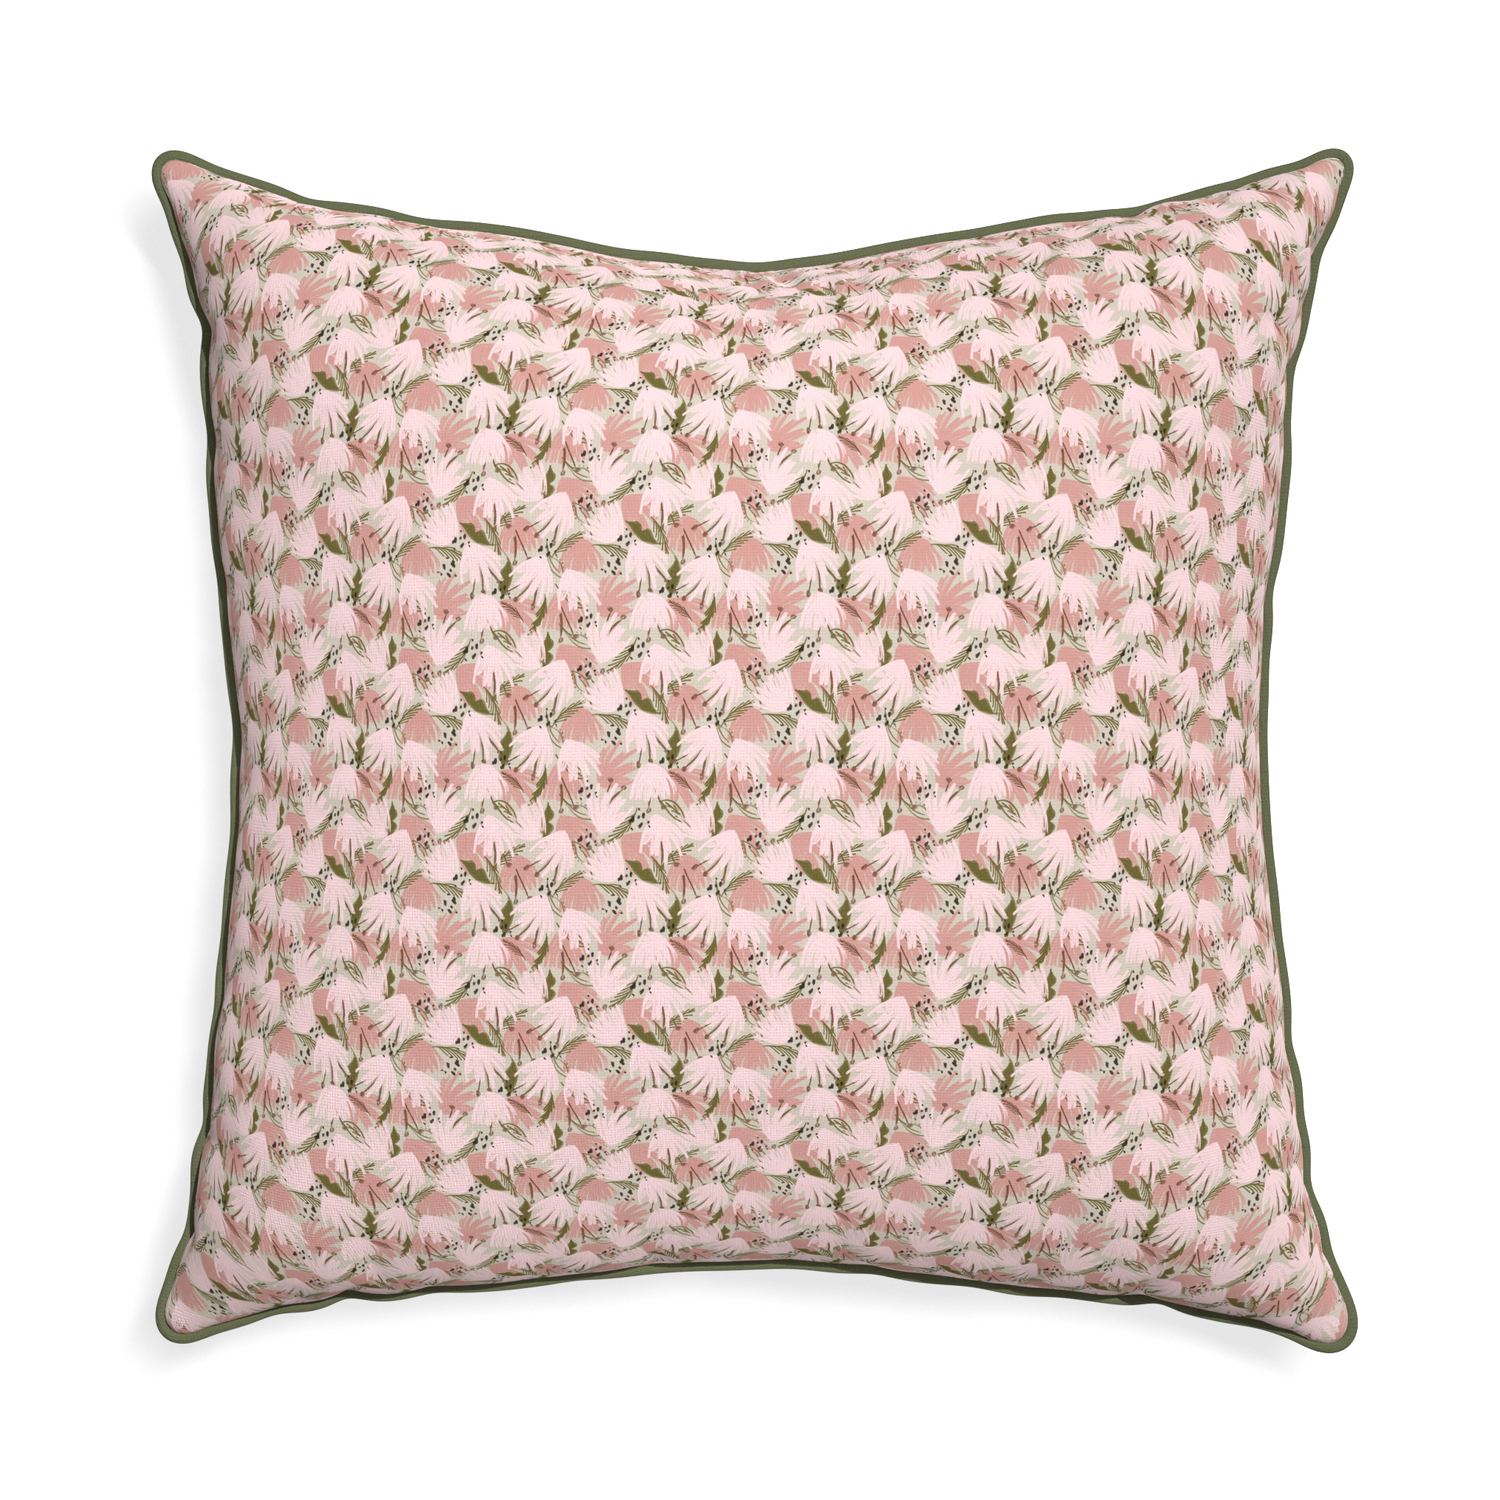 Euro-sham eden pink custom pillow with f piping on white background